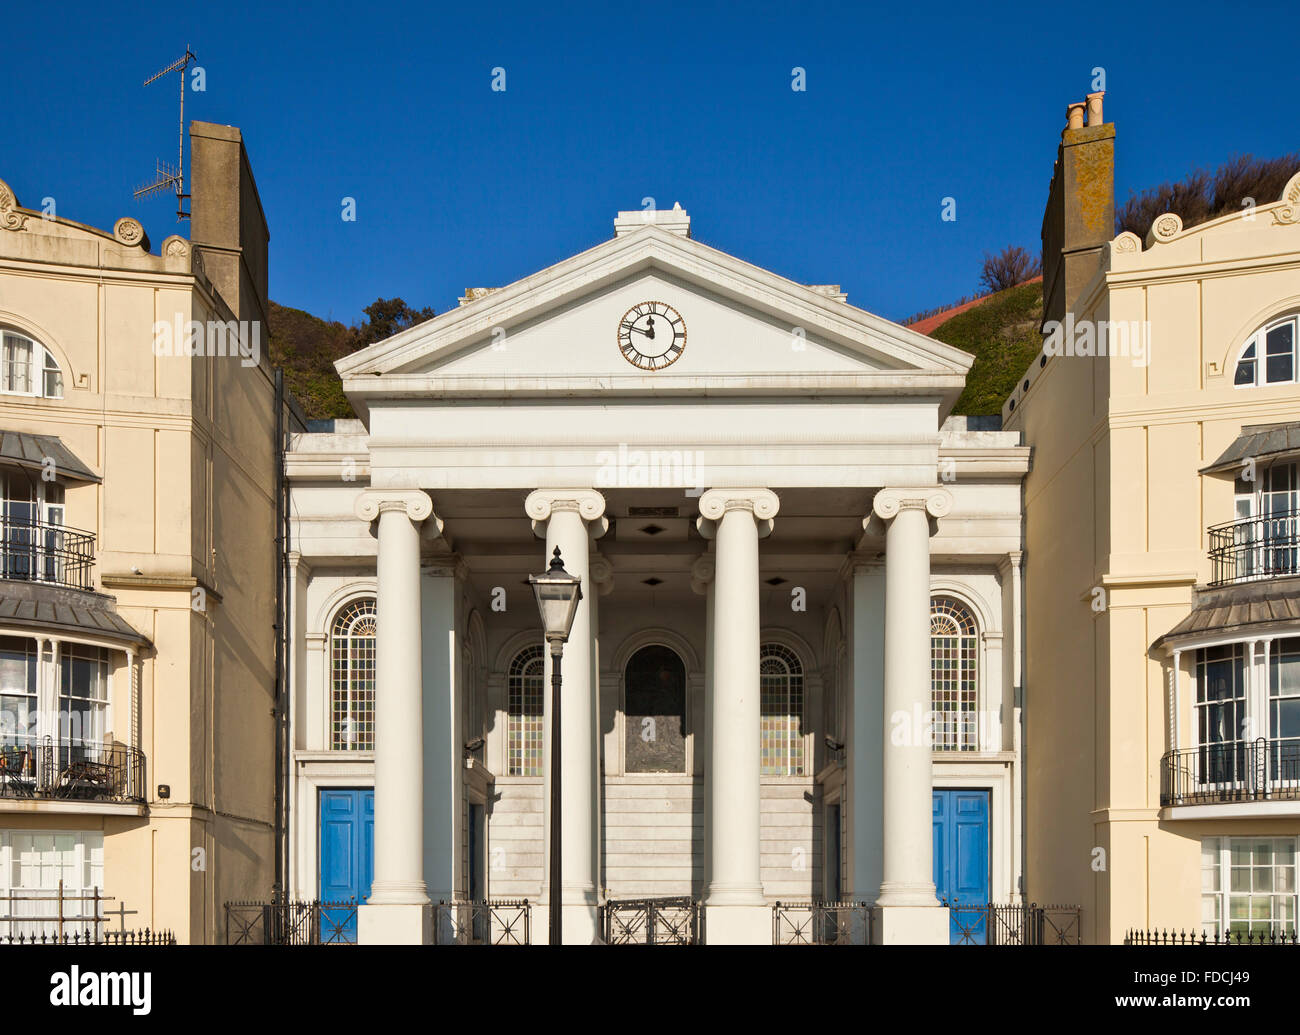 The Regency architecture of St Mary in the Castle church in Pelham Crescent, Hastings. Stock Photo